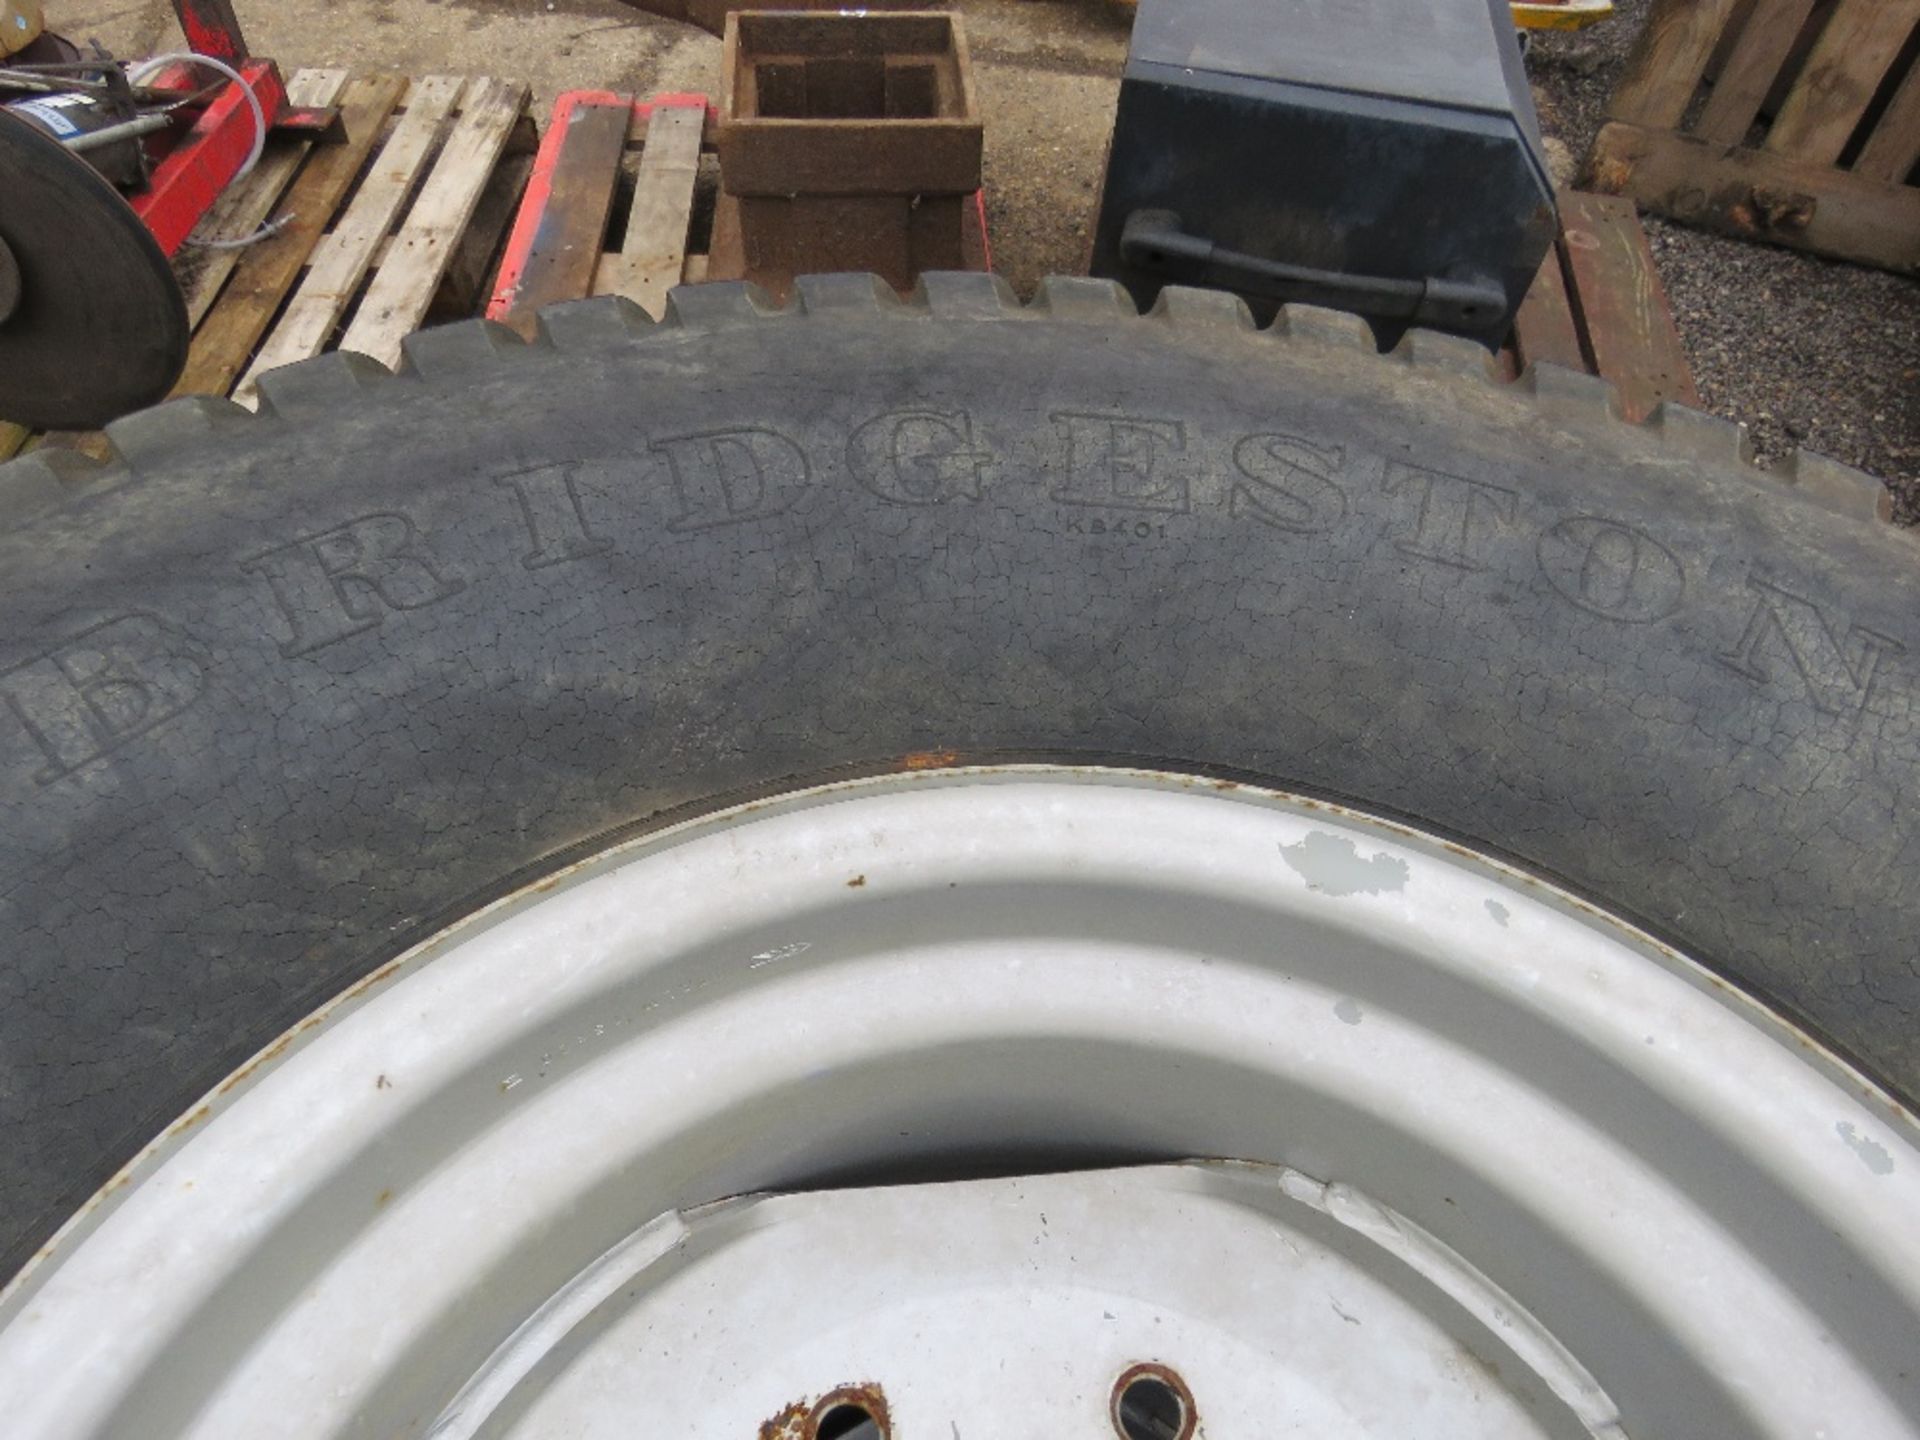 2 X WHEEL AND TYRES, GRASS TREAD PATTERN SIZE 475/65D20 FOR COMPACT TRACTOR. - Image 3 of 4